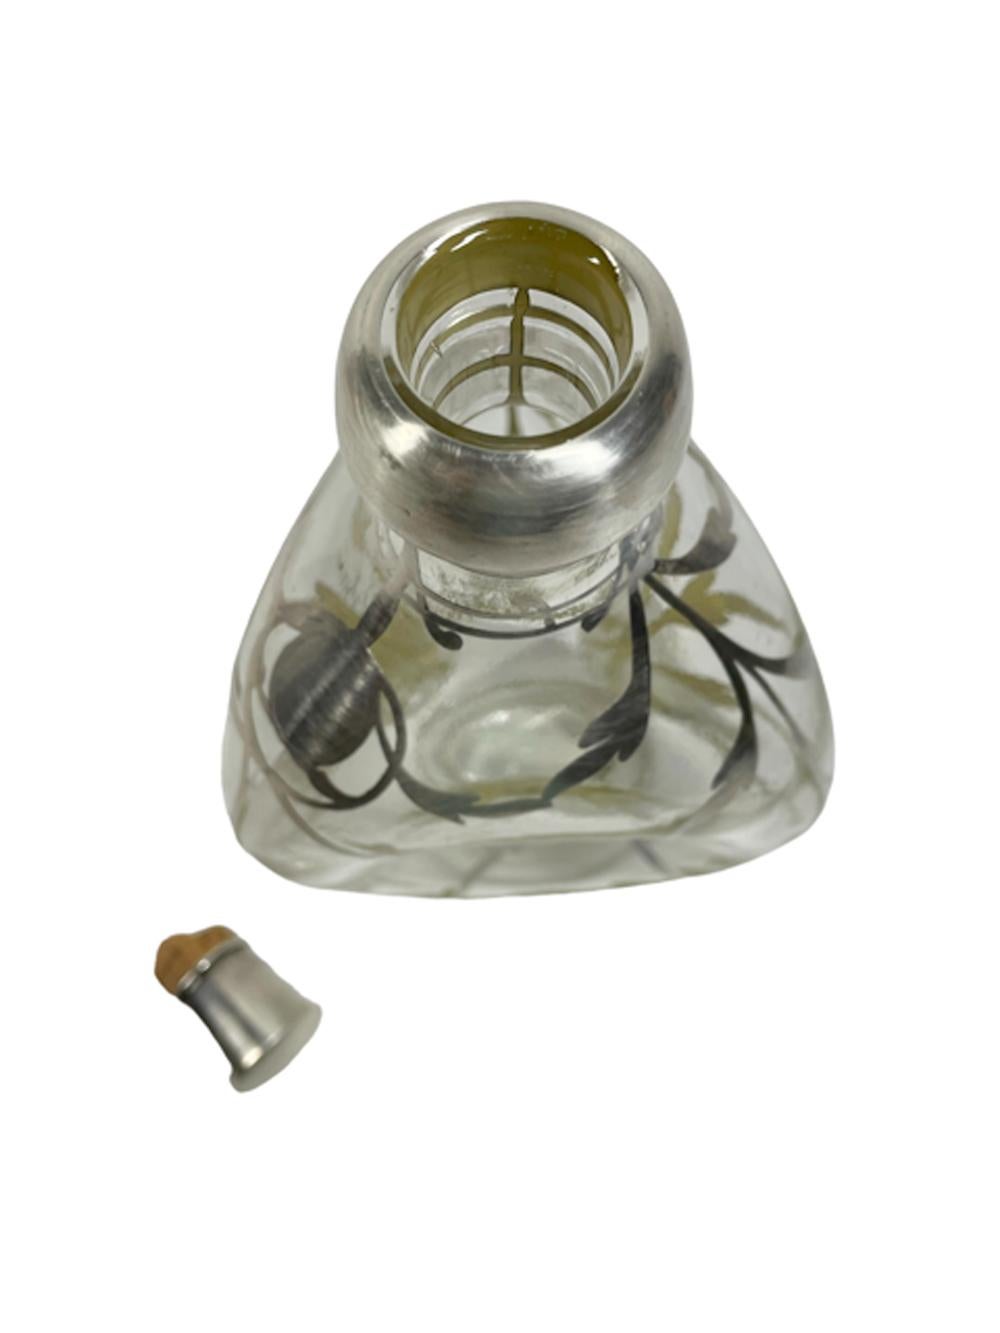 Art Nouveau sterling silver overlay clear glass pinch decanter with three dimpled sides and allover scrolling leaf decoration, with a silver overlay collar and sterling capped cork stopper.